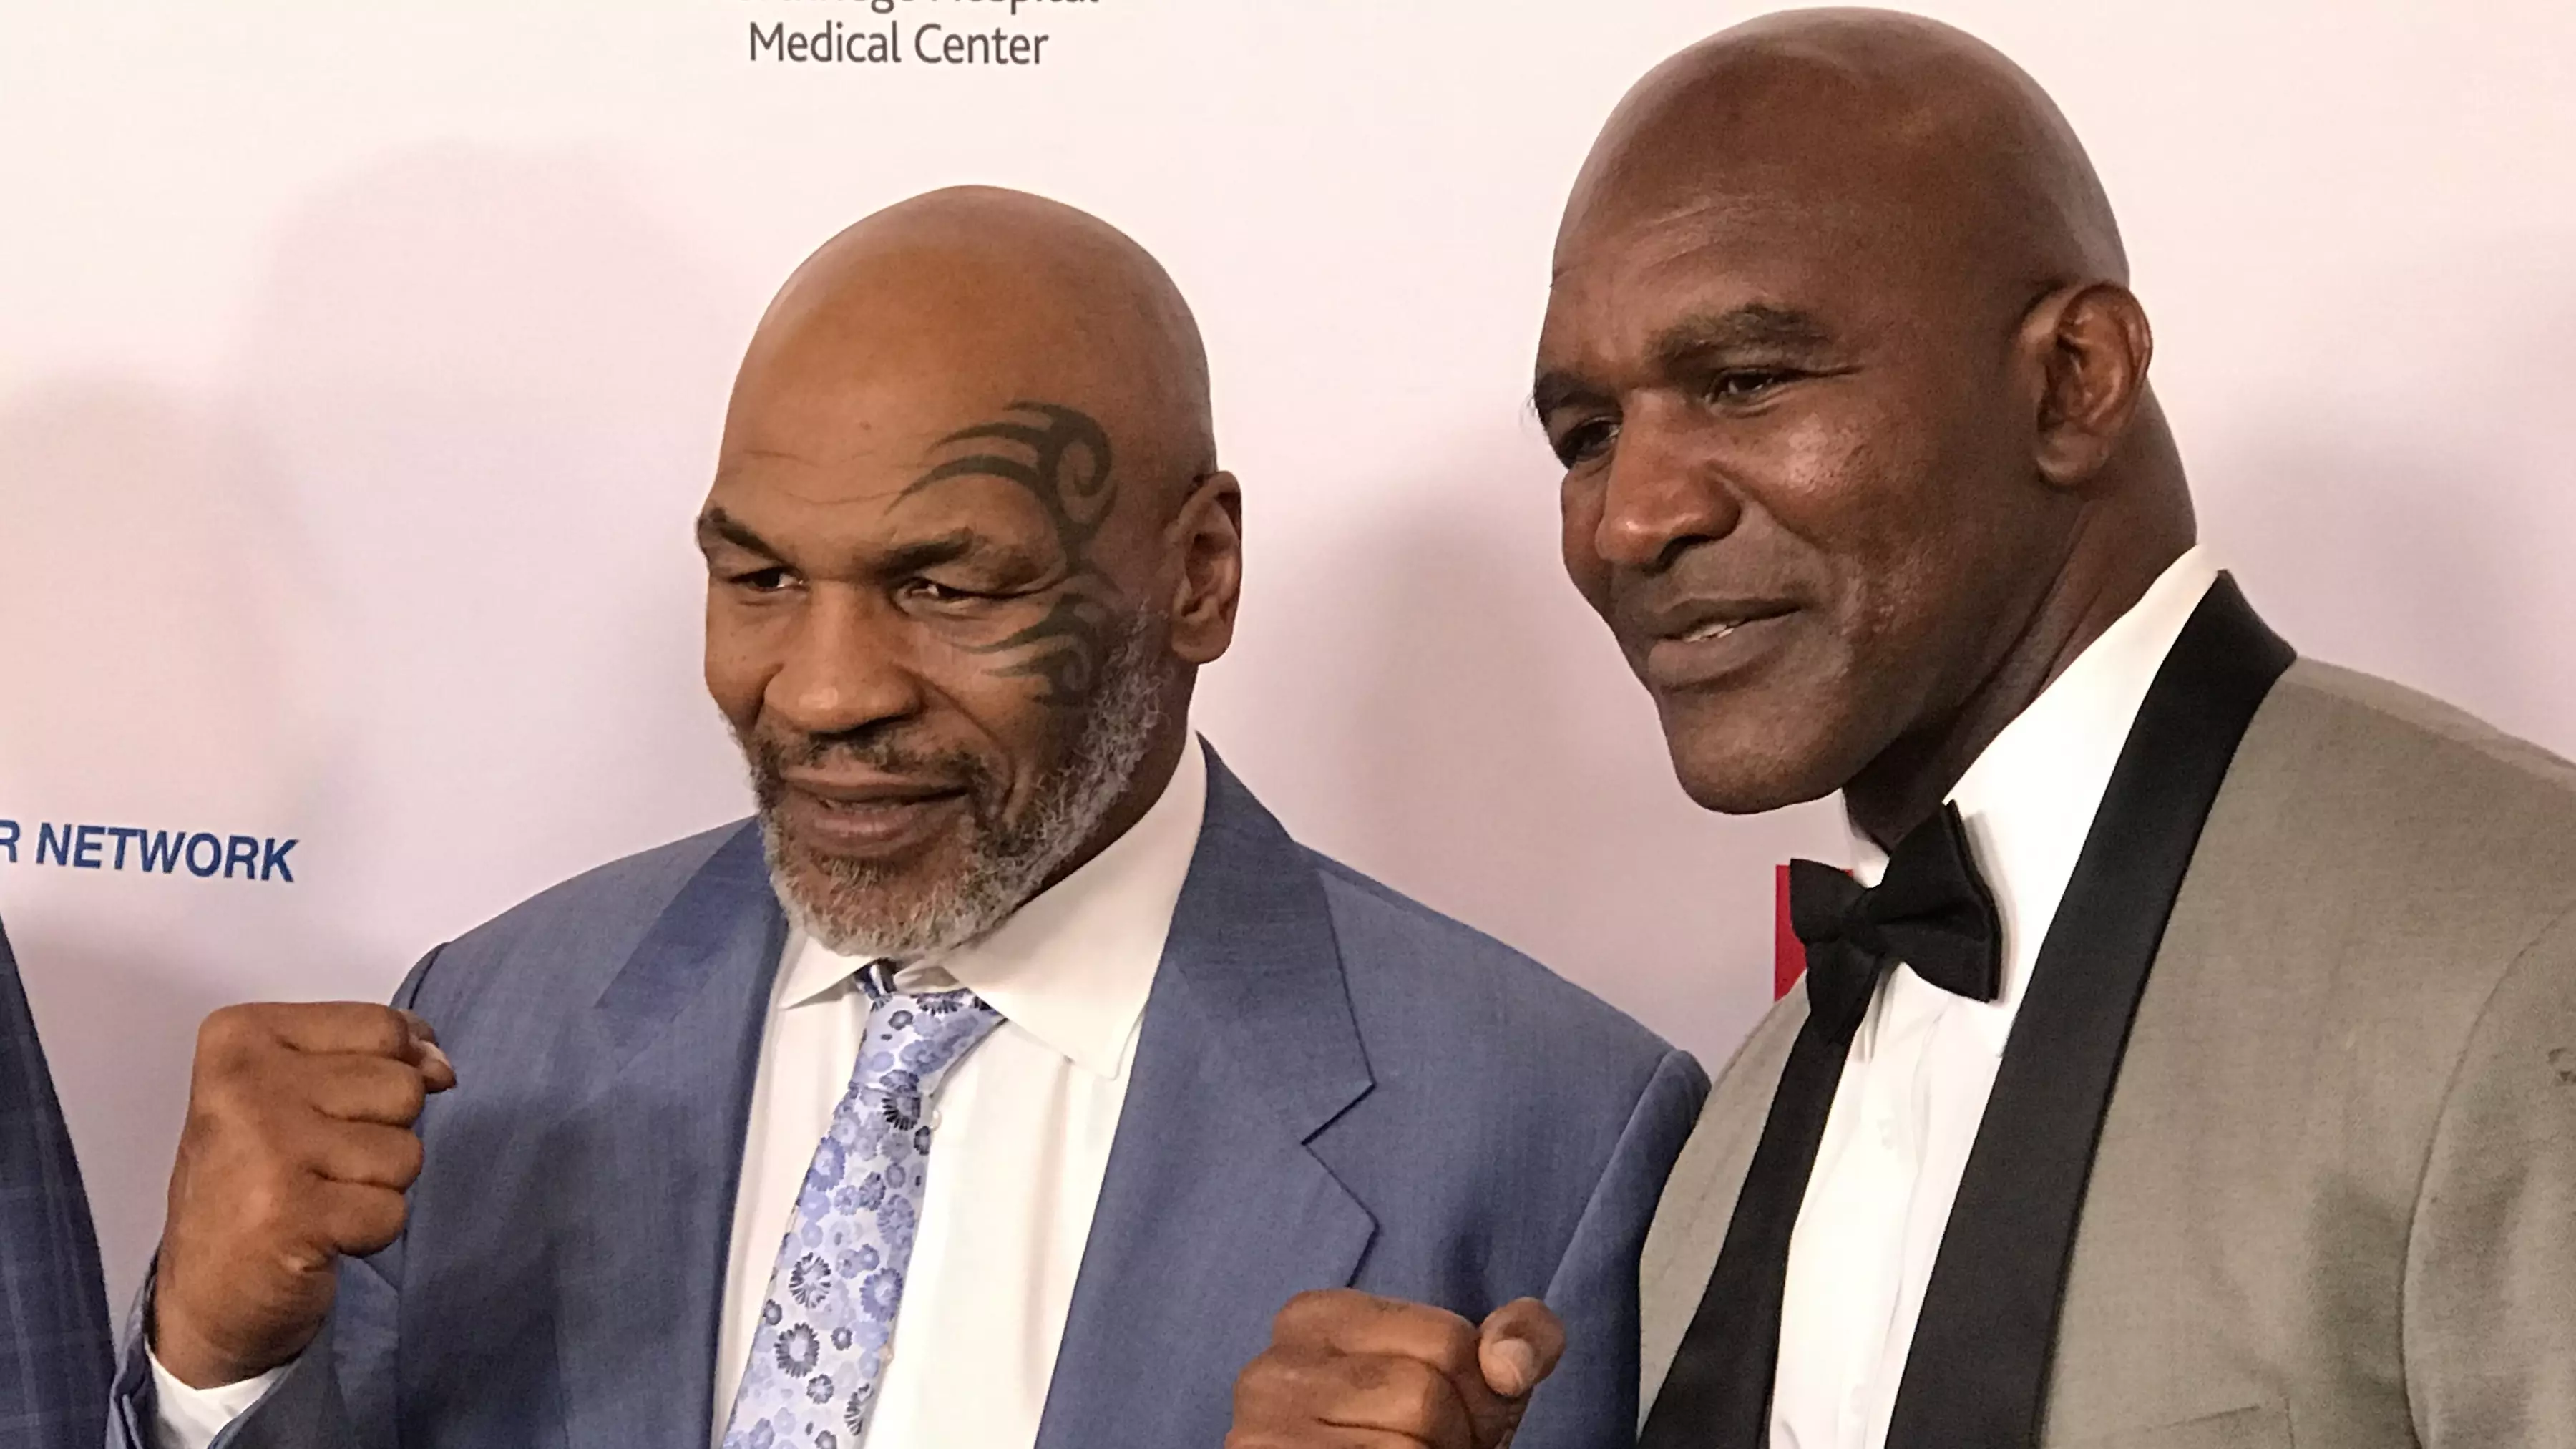 Mike Tyson And Evander Holyfield Trilogy Bout In The Works For 2021